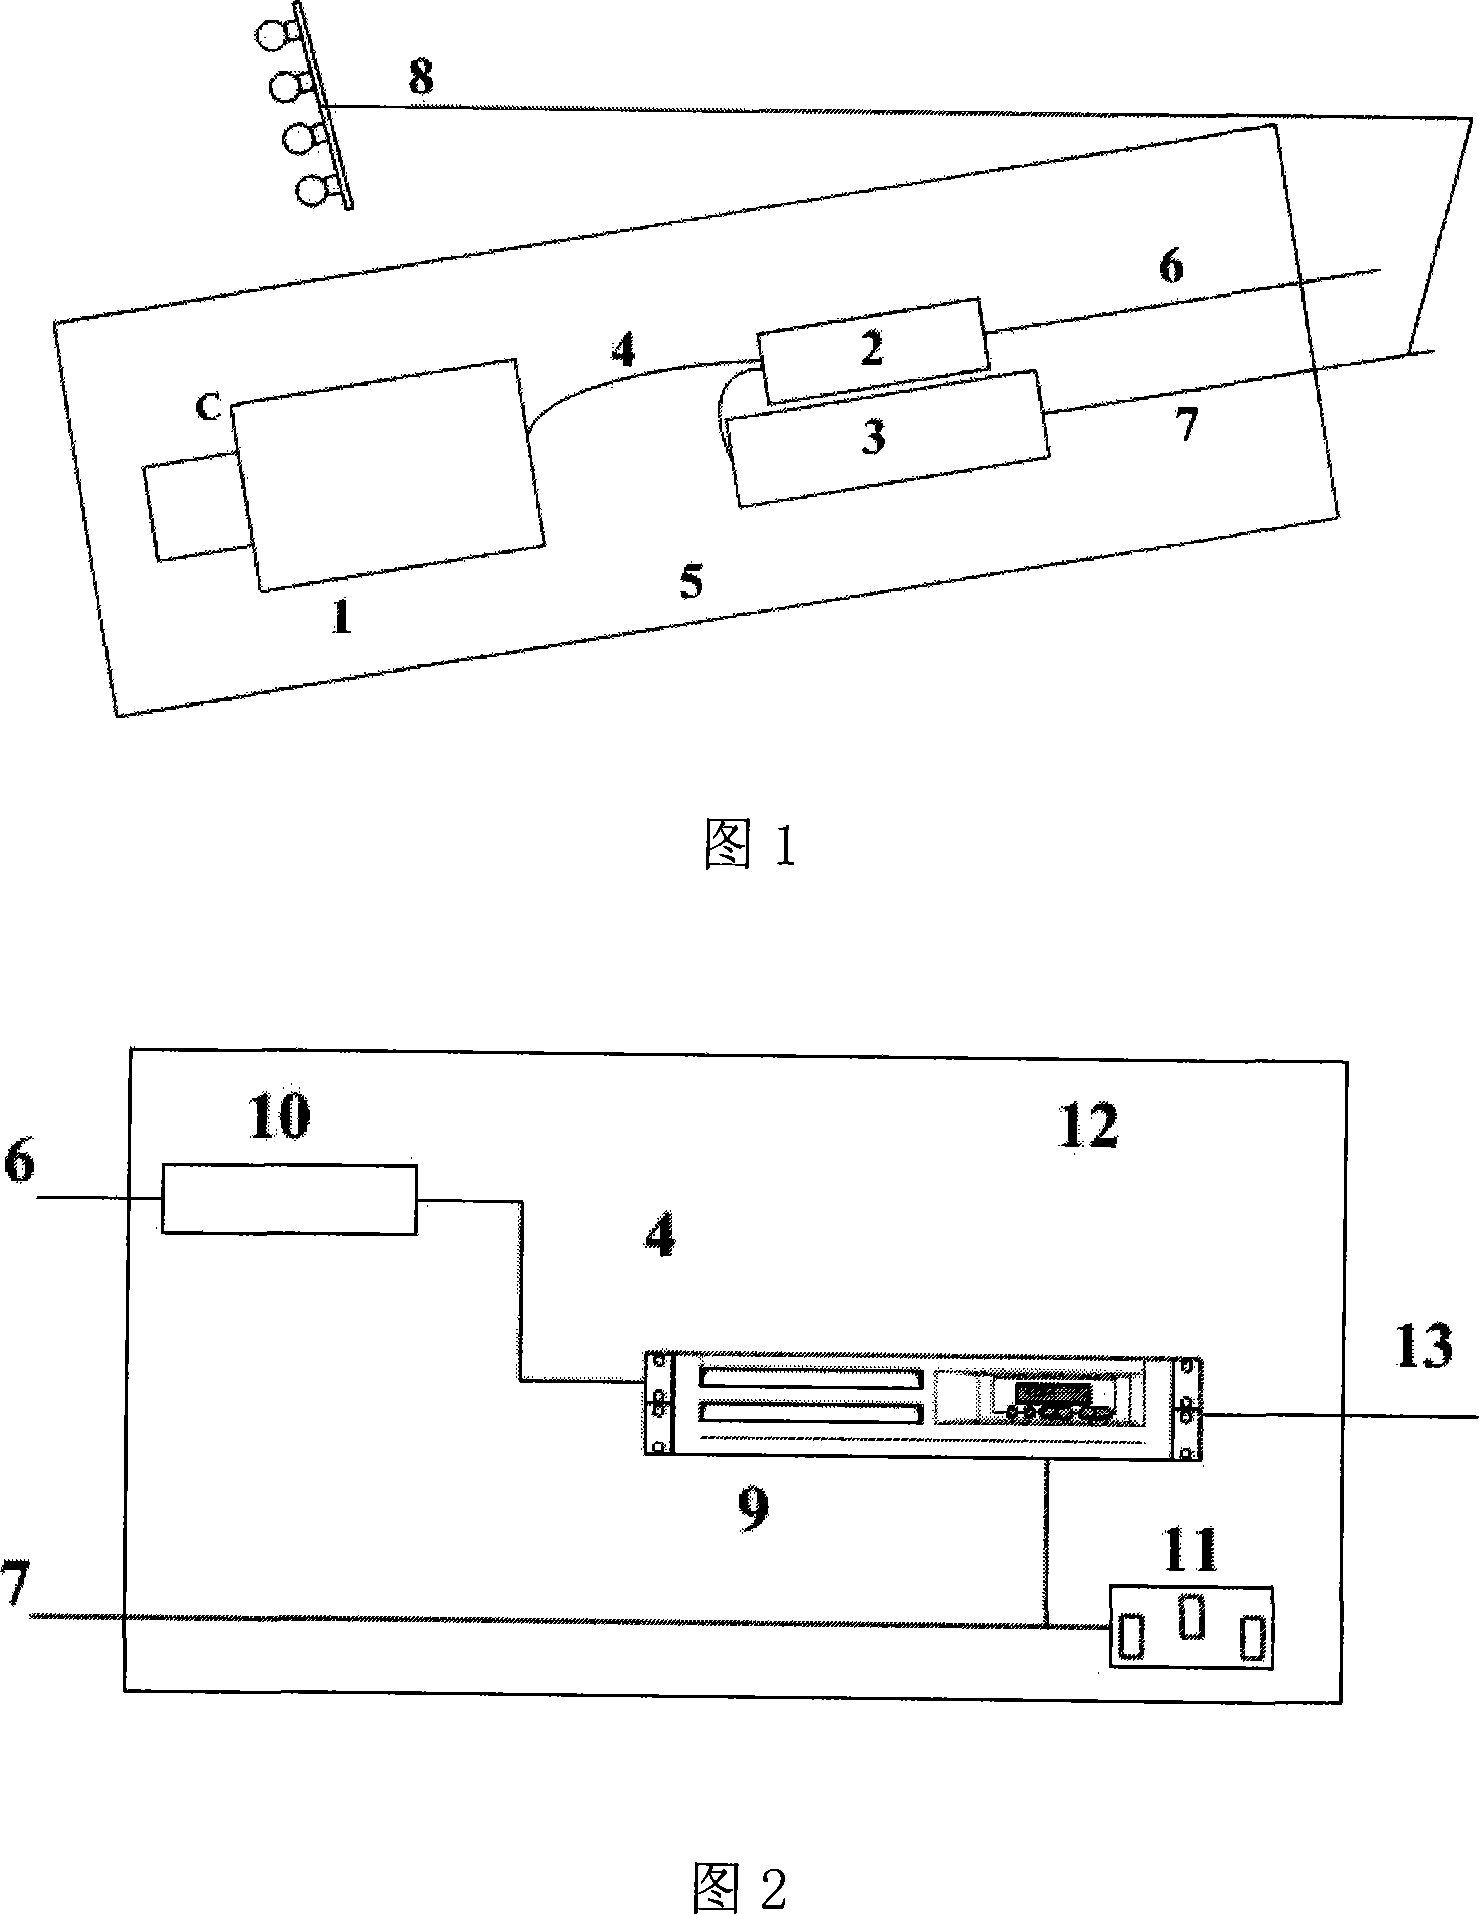 Red light overriding detection system and method based on digital video camera